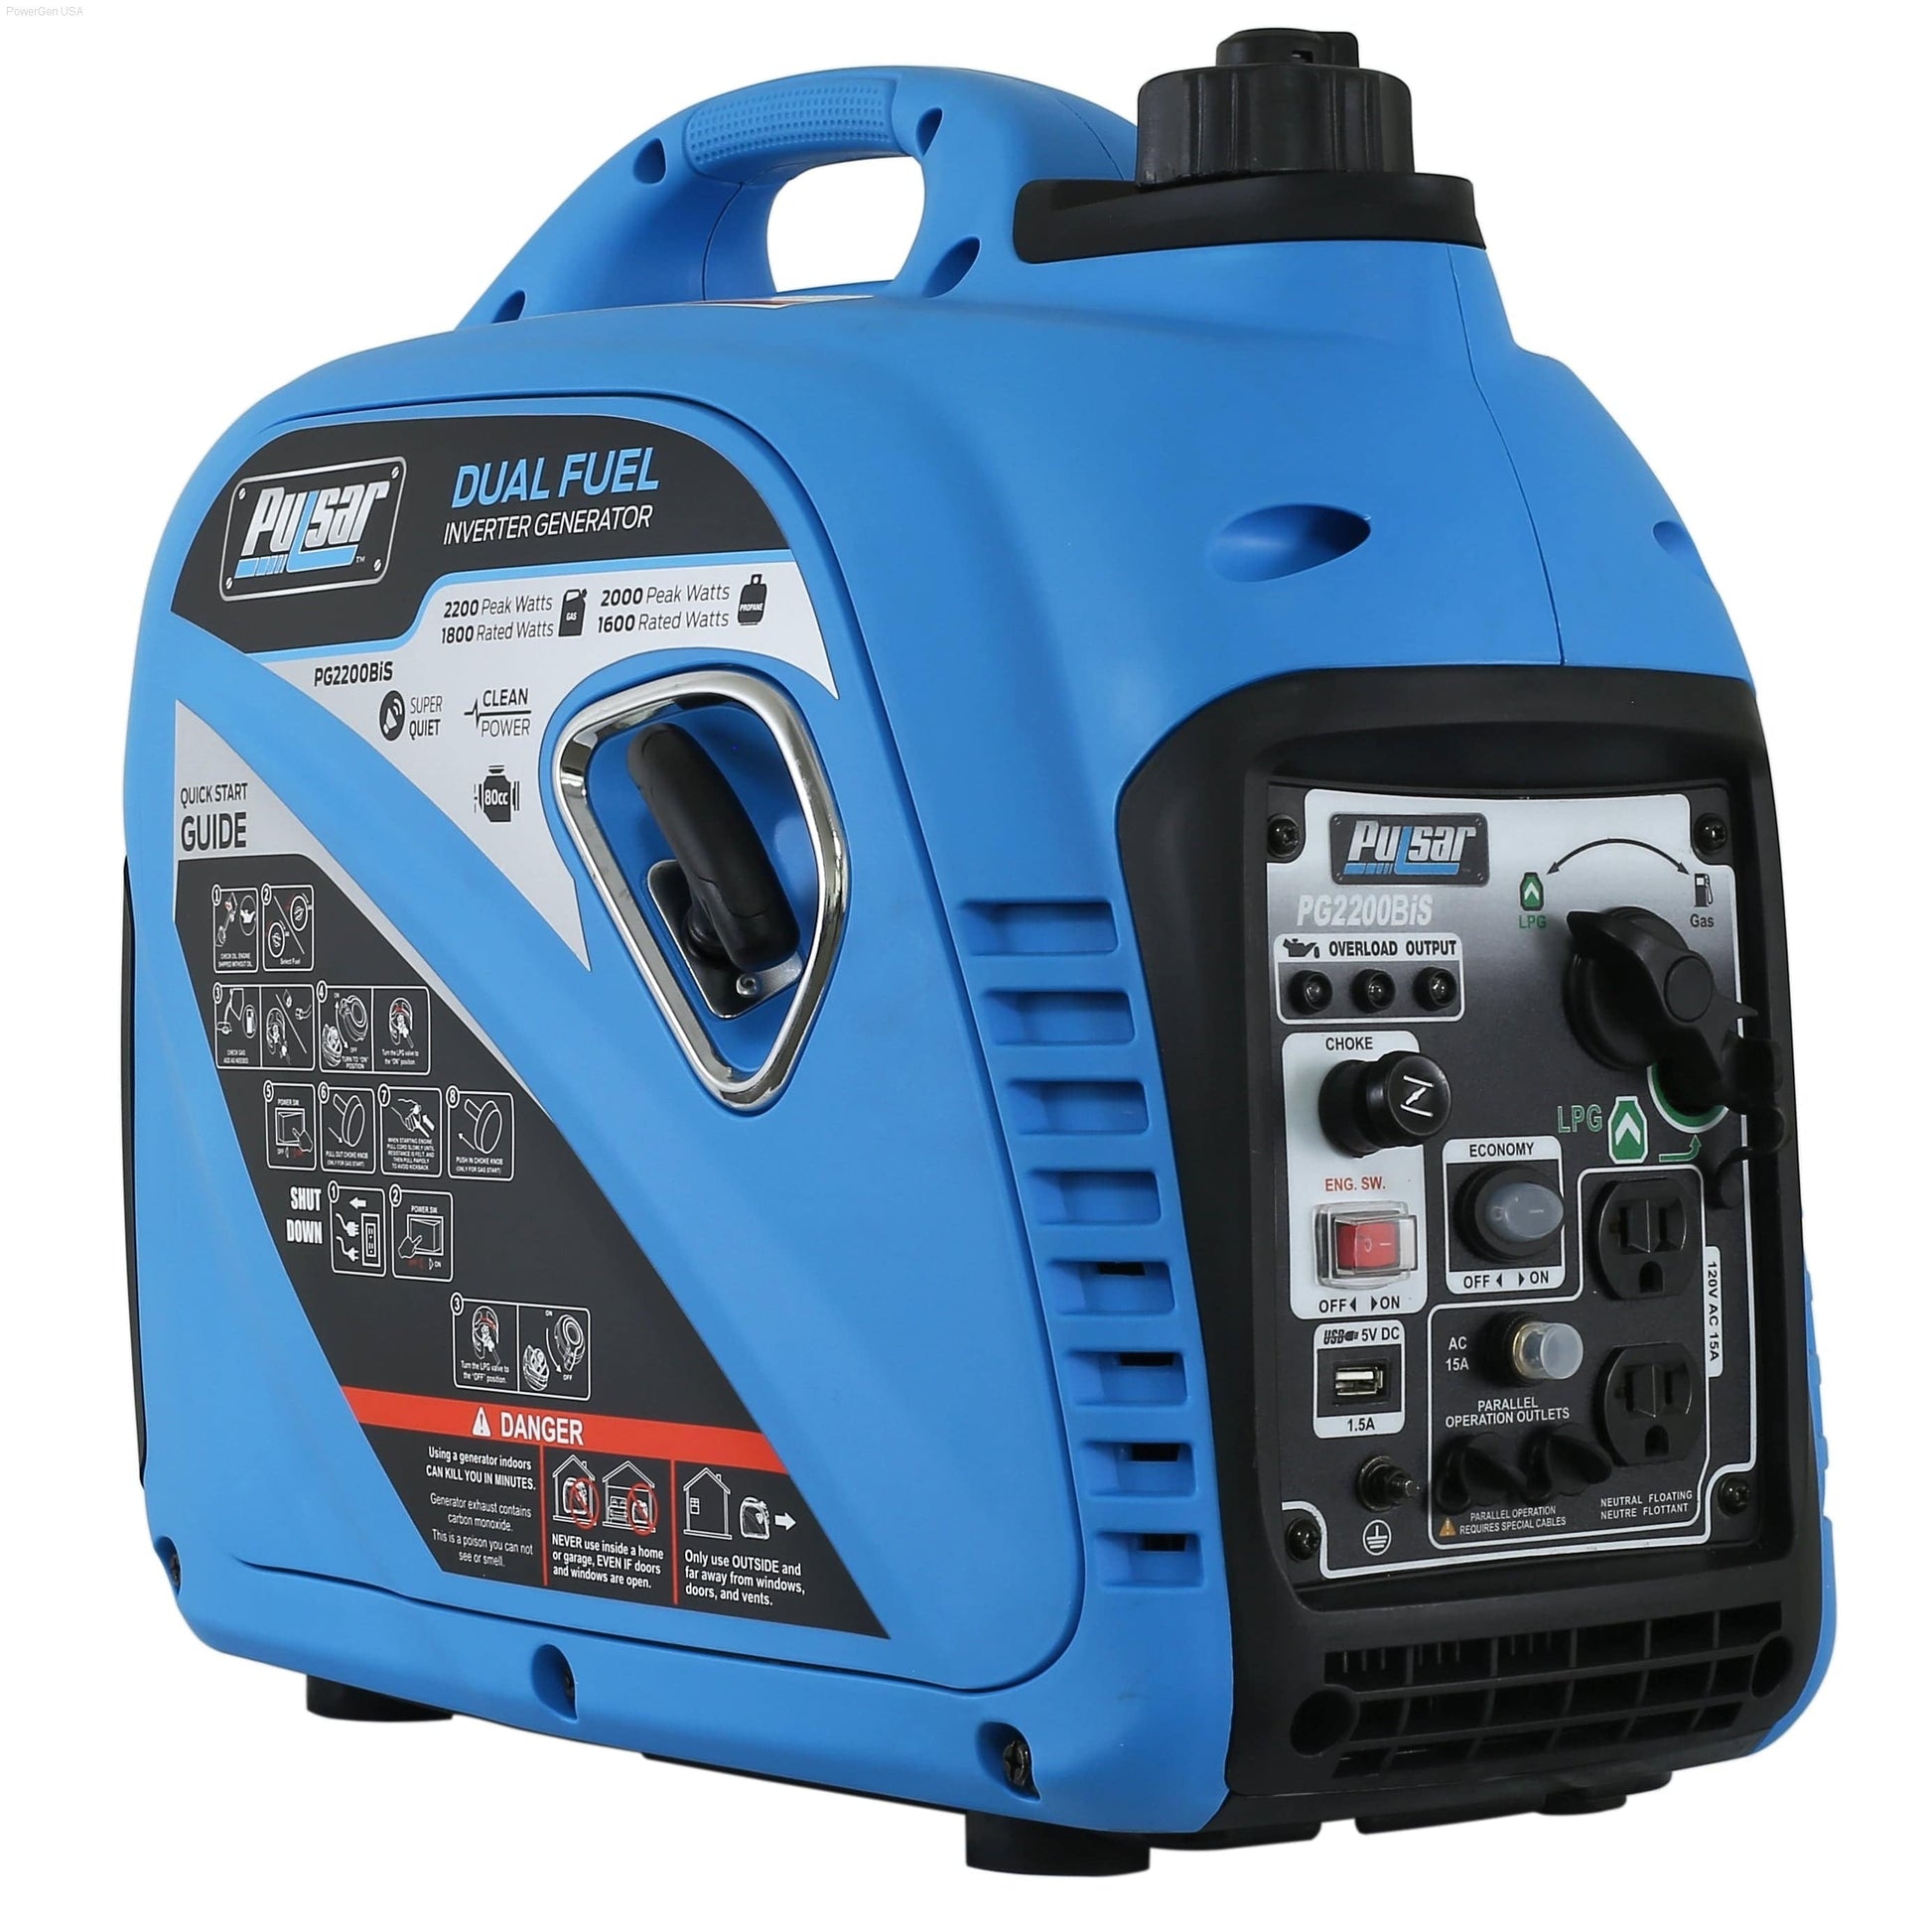 Dual Fuel Hybrid - Pulsar PG2200BiS-DUAL-Fuel Inverter 2200W Generator RATED 1800W, Carb Approved